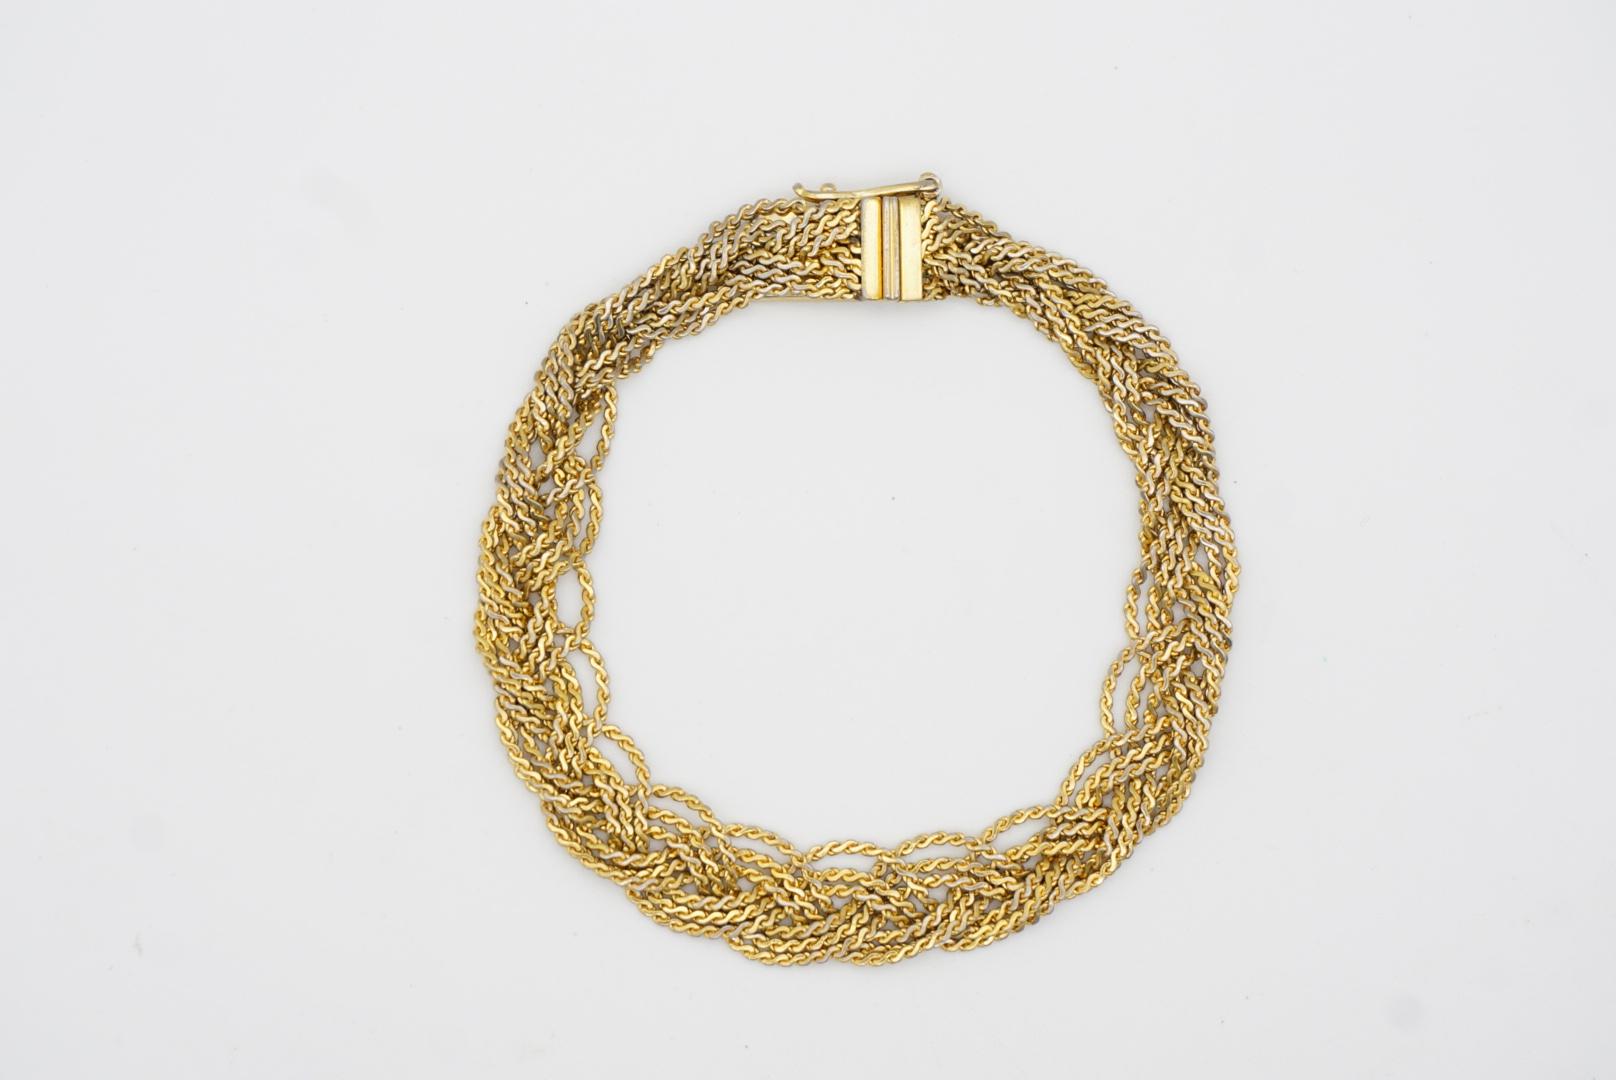 Christian Dior GROSSE 1963 Braided Woven Twisted 3 Triple Strands Rope Bracelet 1